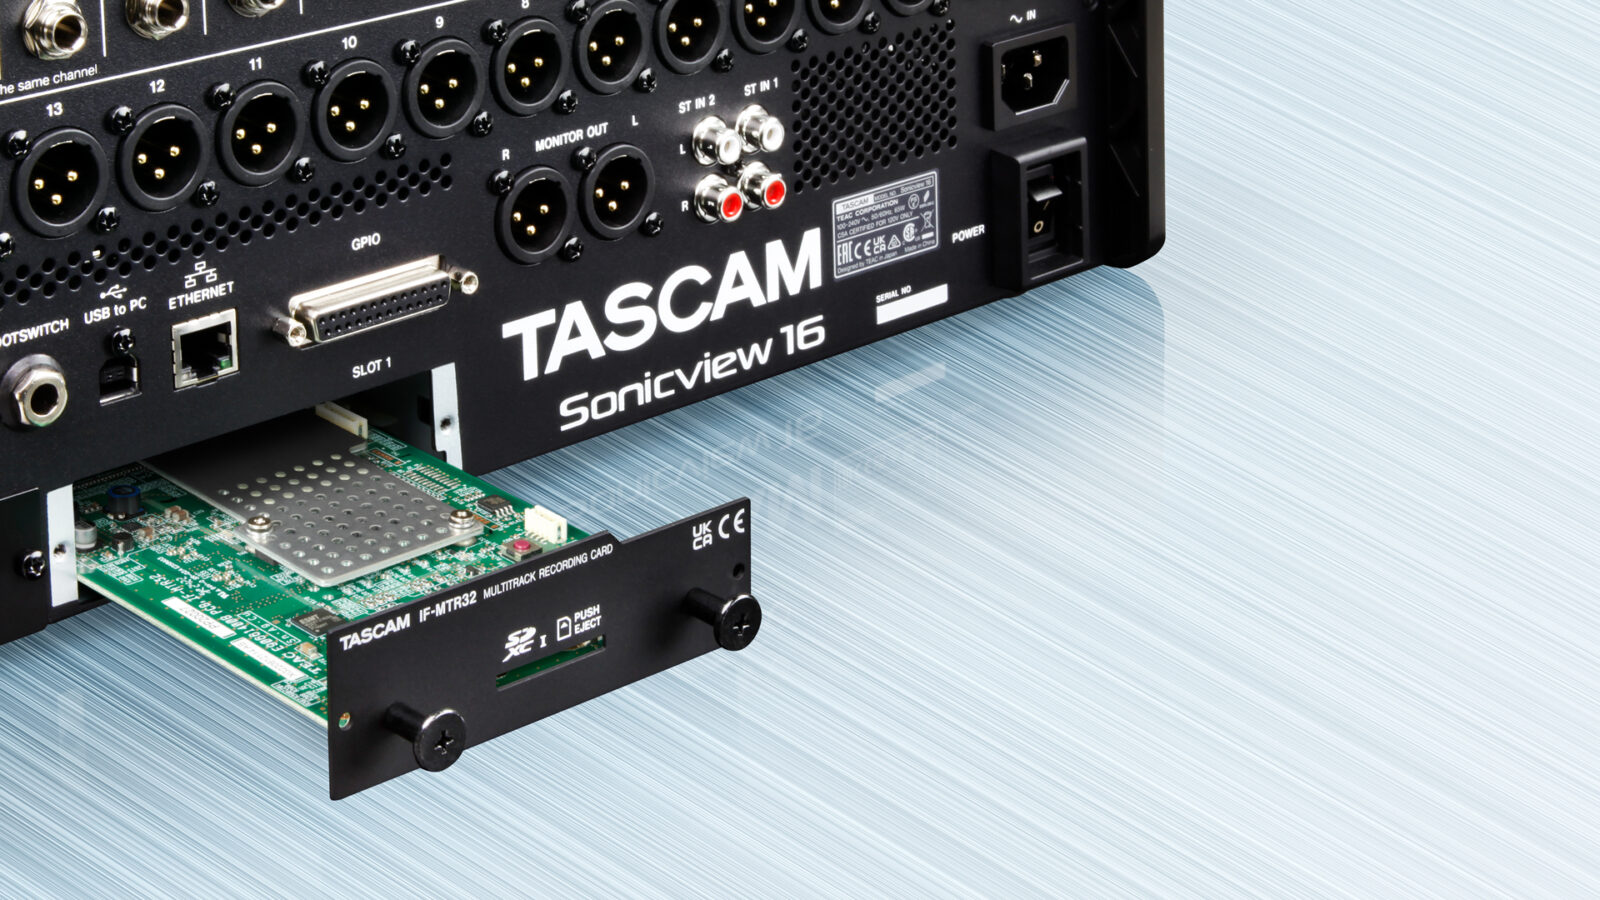 Tascam Sonicview rear side showing expansion slot for additional I/O cards